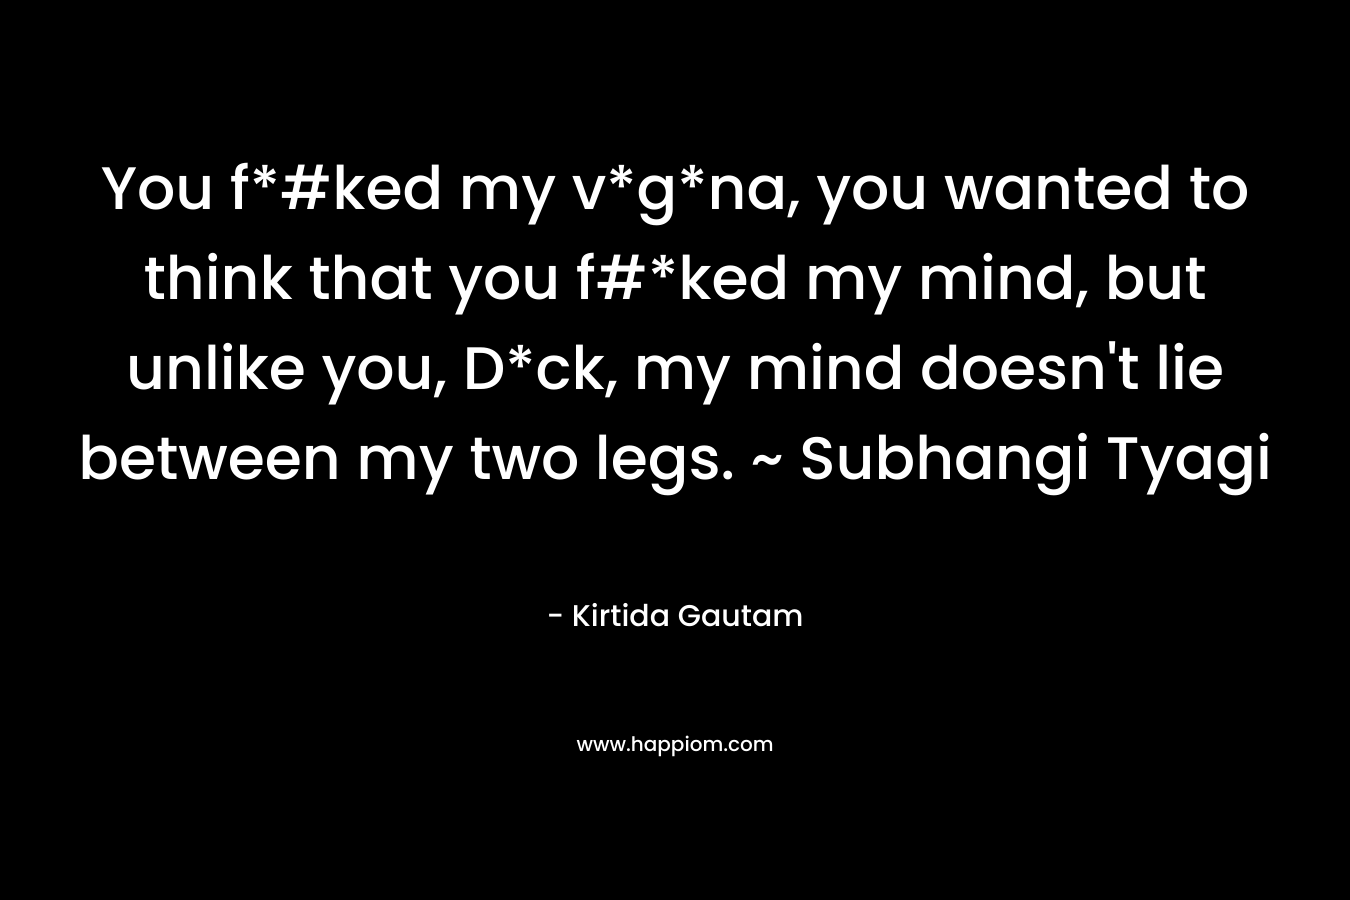 You f*#ked my v*g*na, you wanted to think that you f#*ked my mind, but unlike you, D*ck, my mind doesn’t lie between my two legs. ~ Subhangi Tyagi – Kirtida Gautam